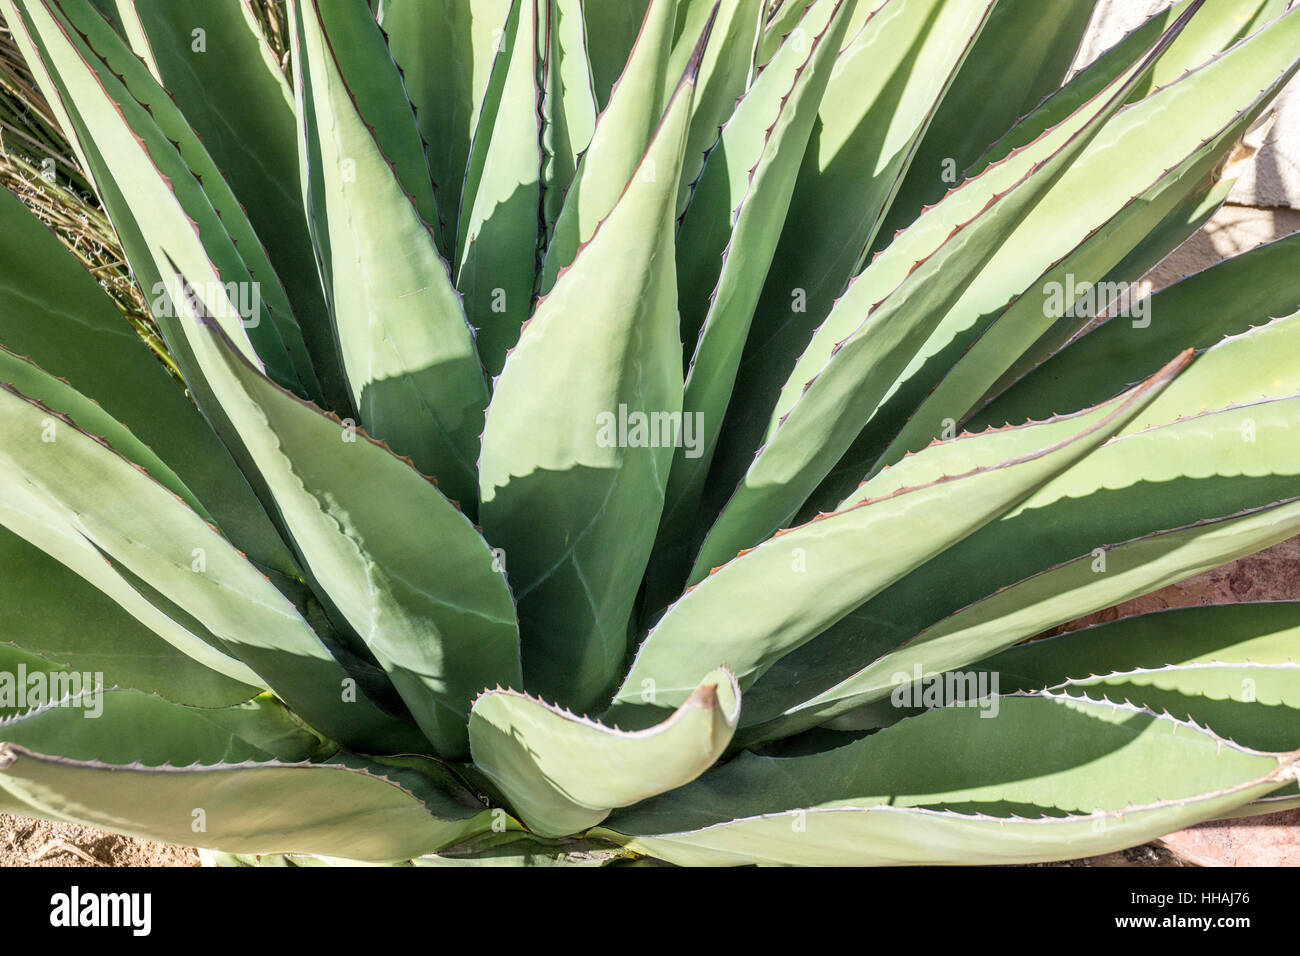 beautiful large green Agave Americana cactus with raised white markings on the leaves planted as an ornamental plant in shopping plaza Tubac Arizona Stock Photo